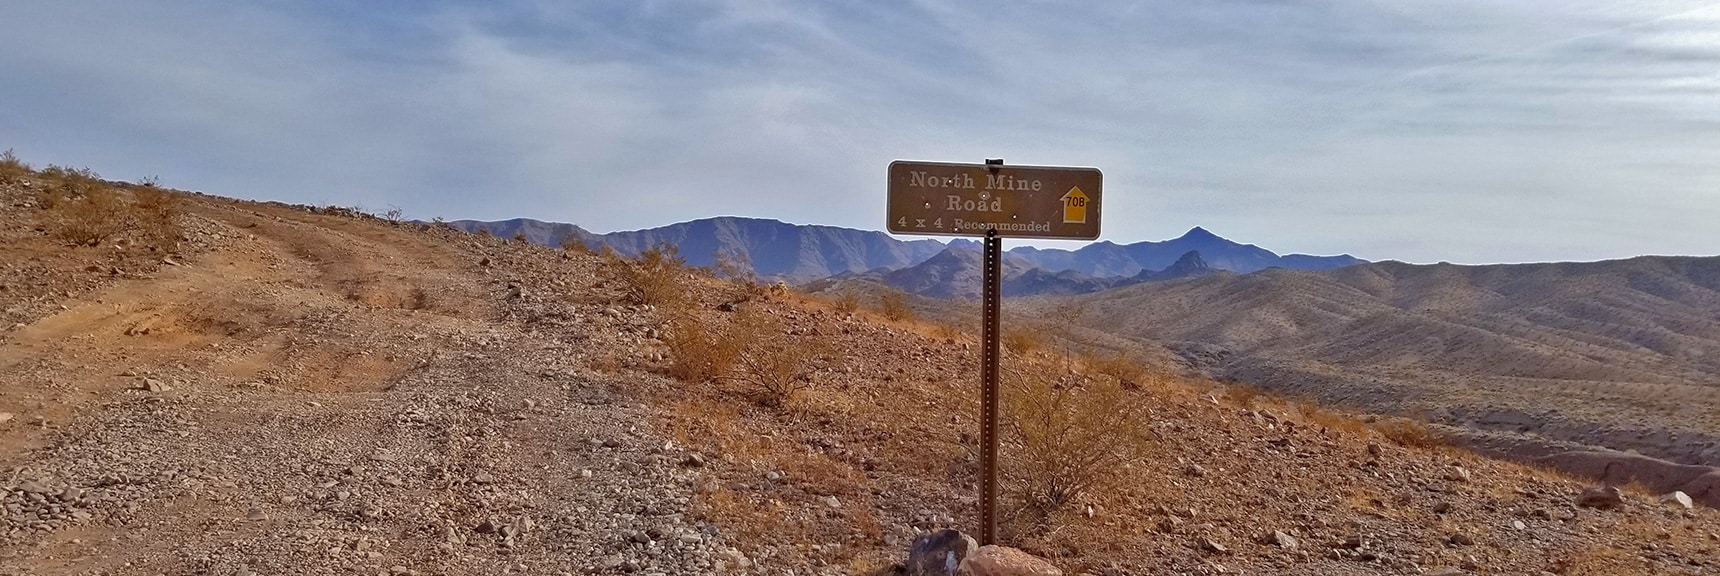 Entrance to North Mine Access Road from Kingman Wash Access Road | Kingman Wash Access Road | Lake Mead National Recreation Area, Arizona